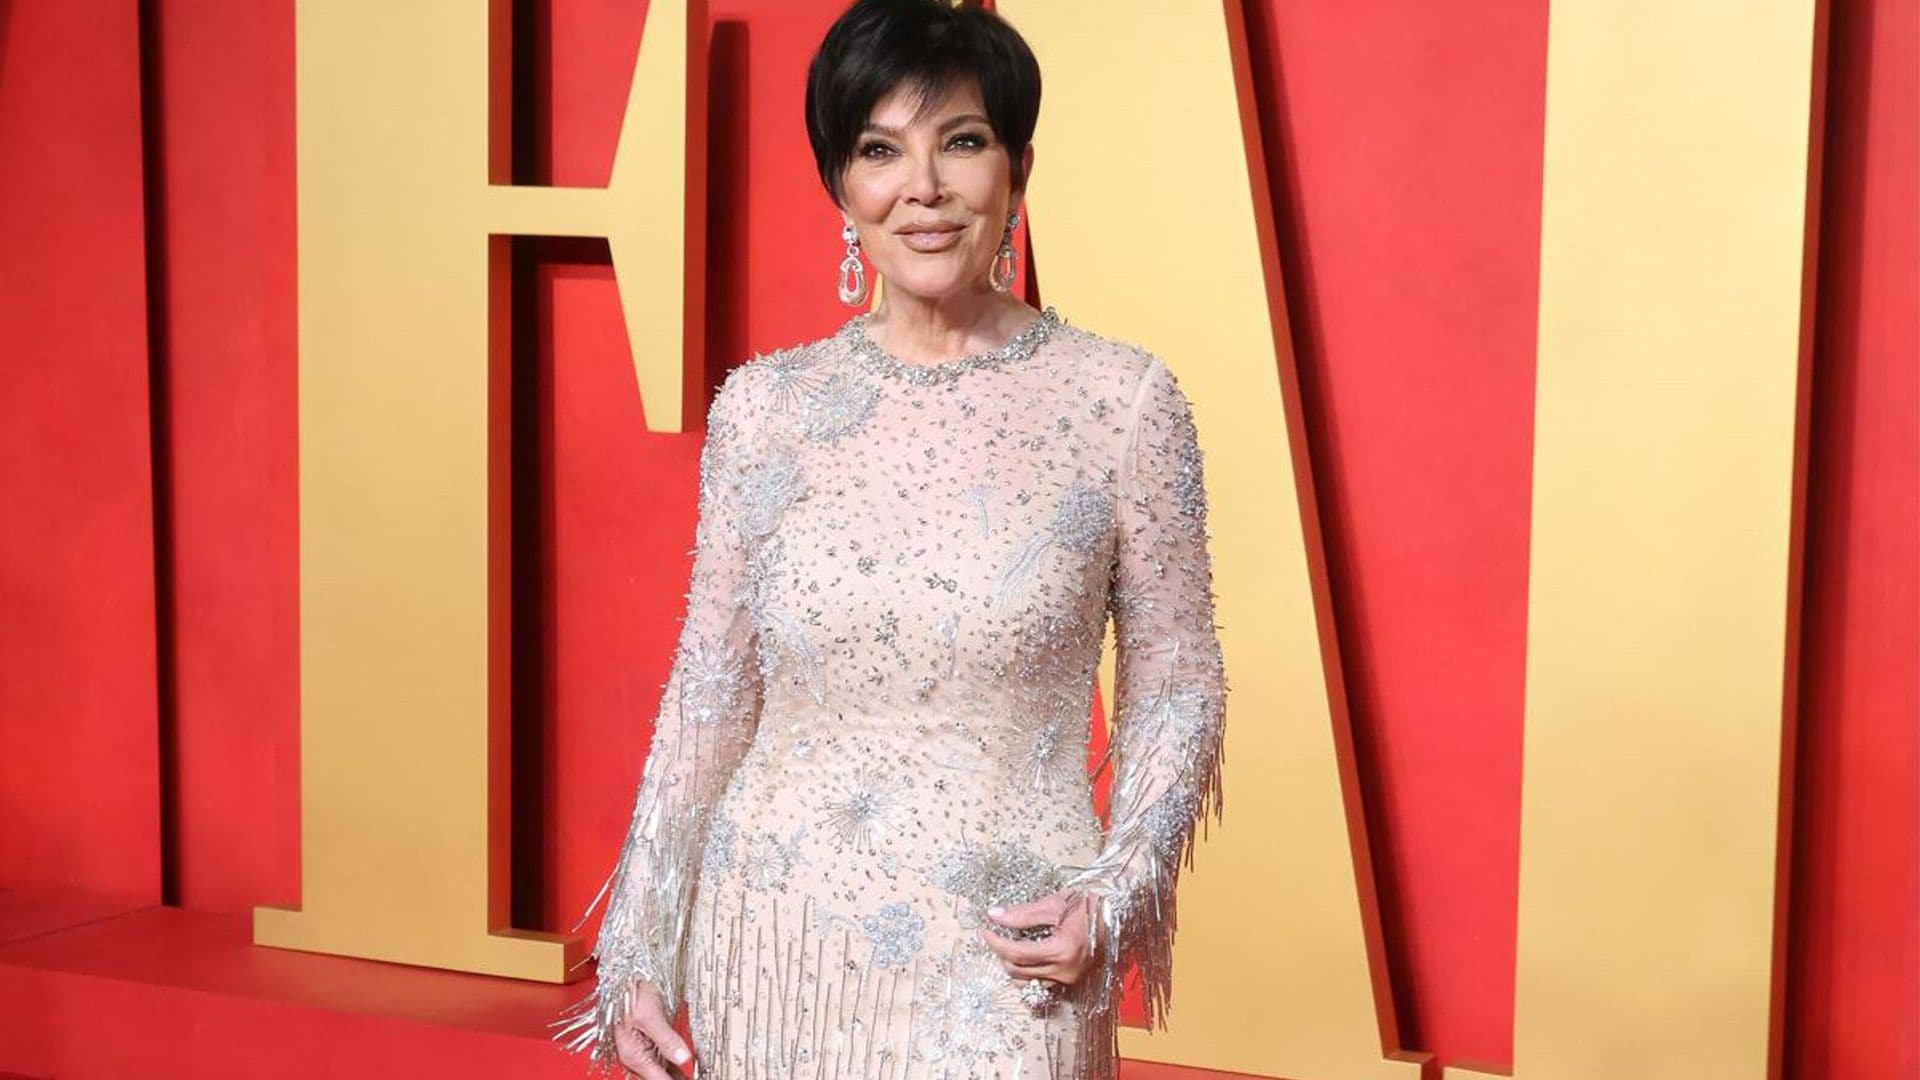 Kris Jenner announces the unexpected death of her sister Karen Houghton